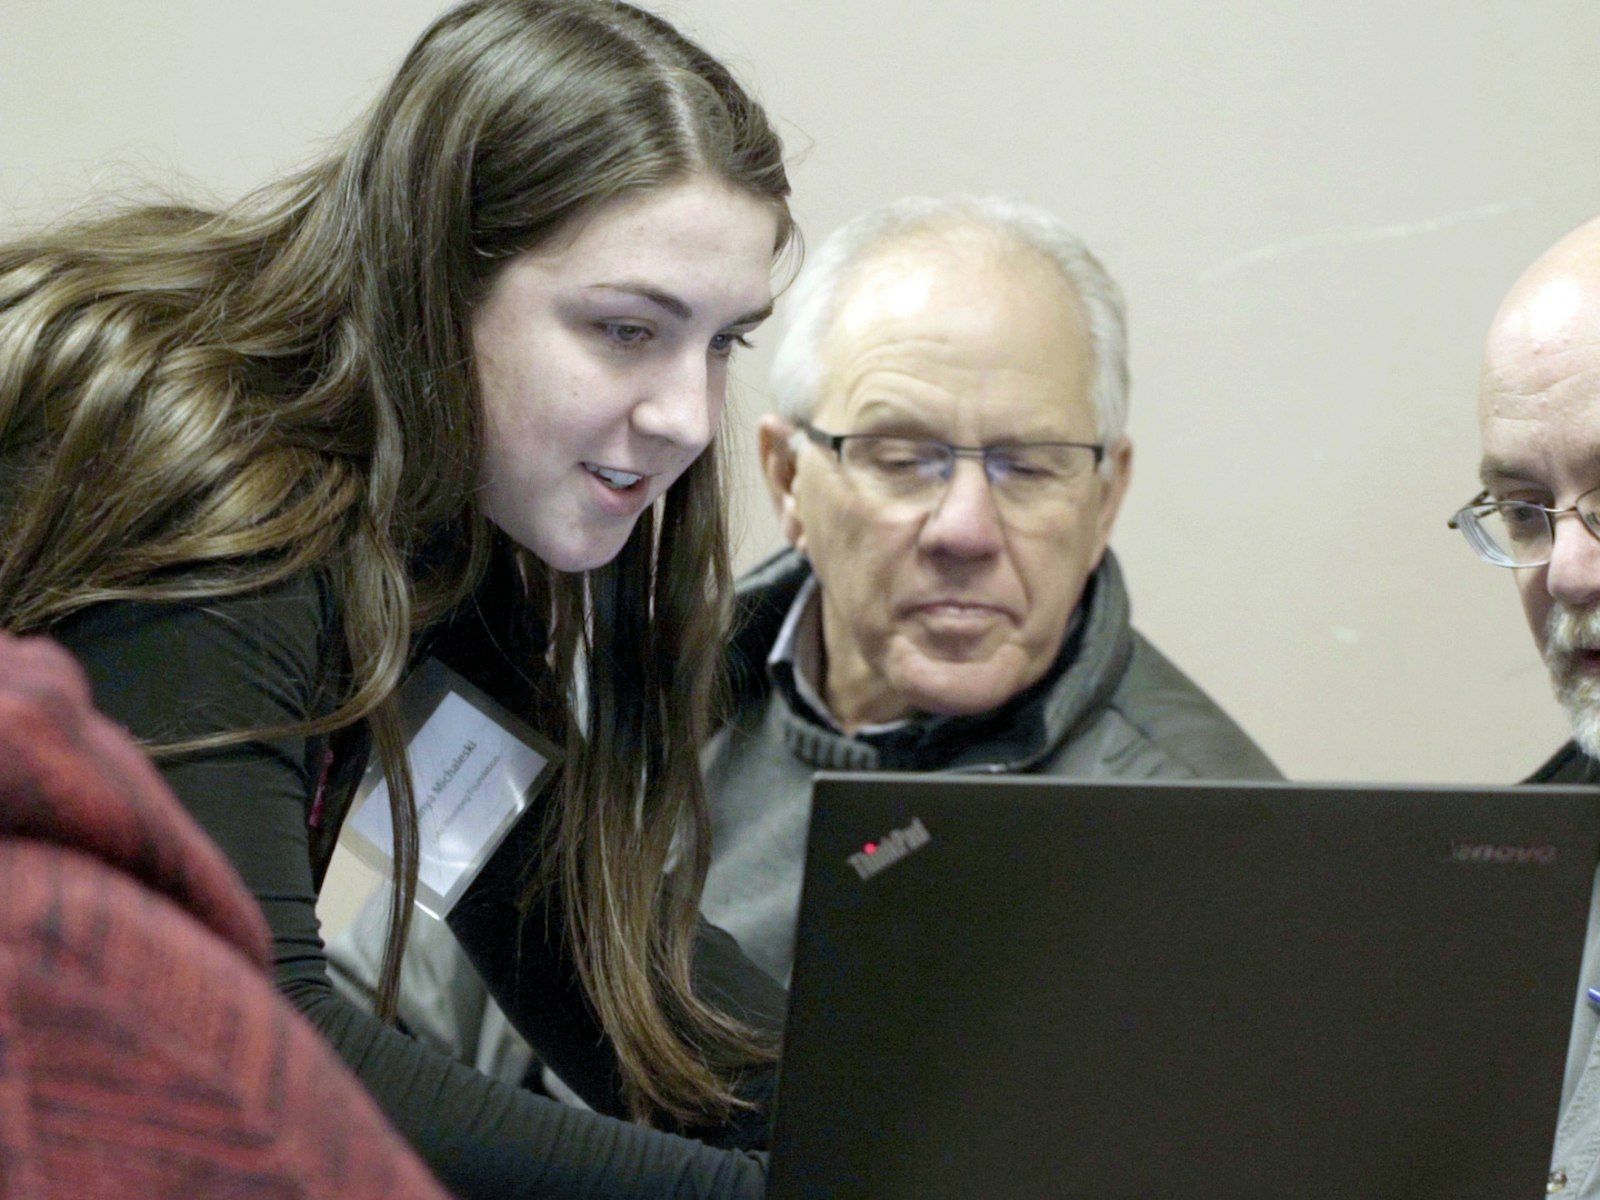 Woman showing two men datastream on a laptop